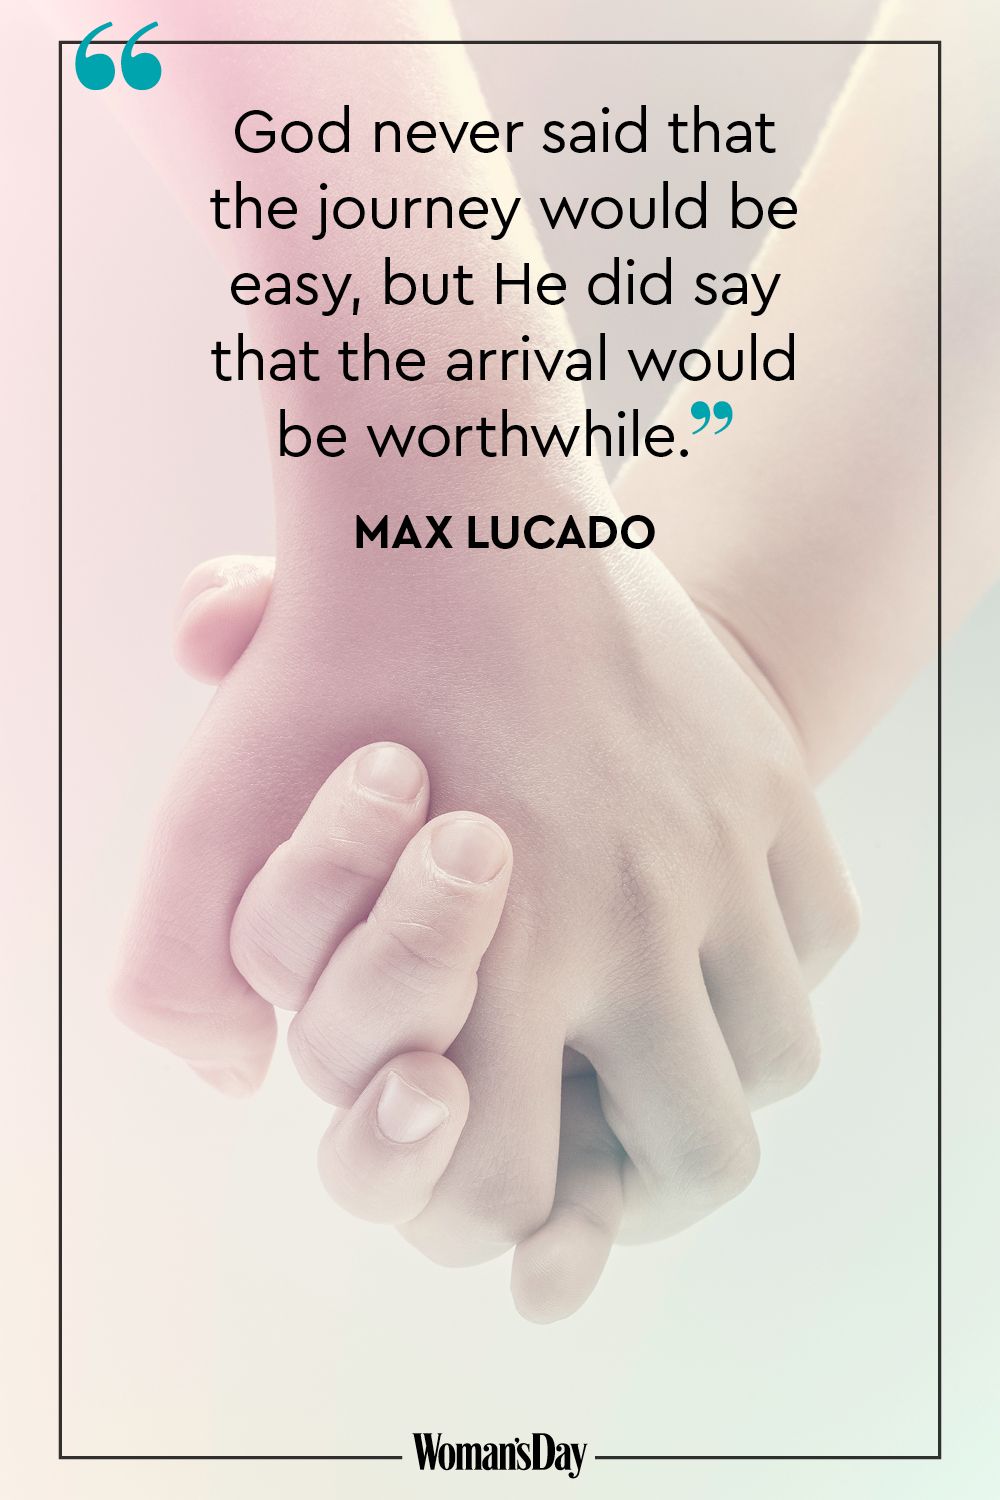 god never said that the journey would be easy, but he did say that the arrival would be worthwhile. max lucado